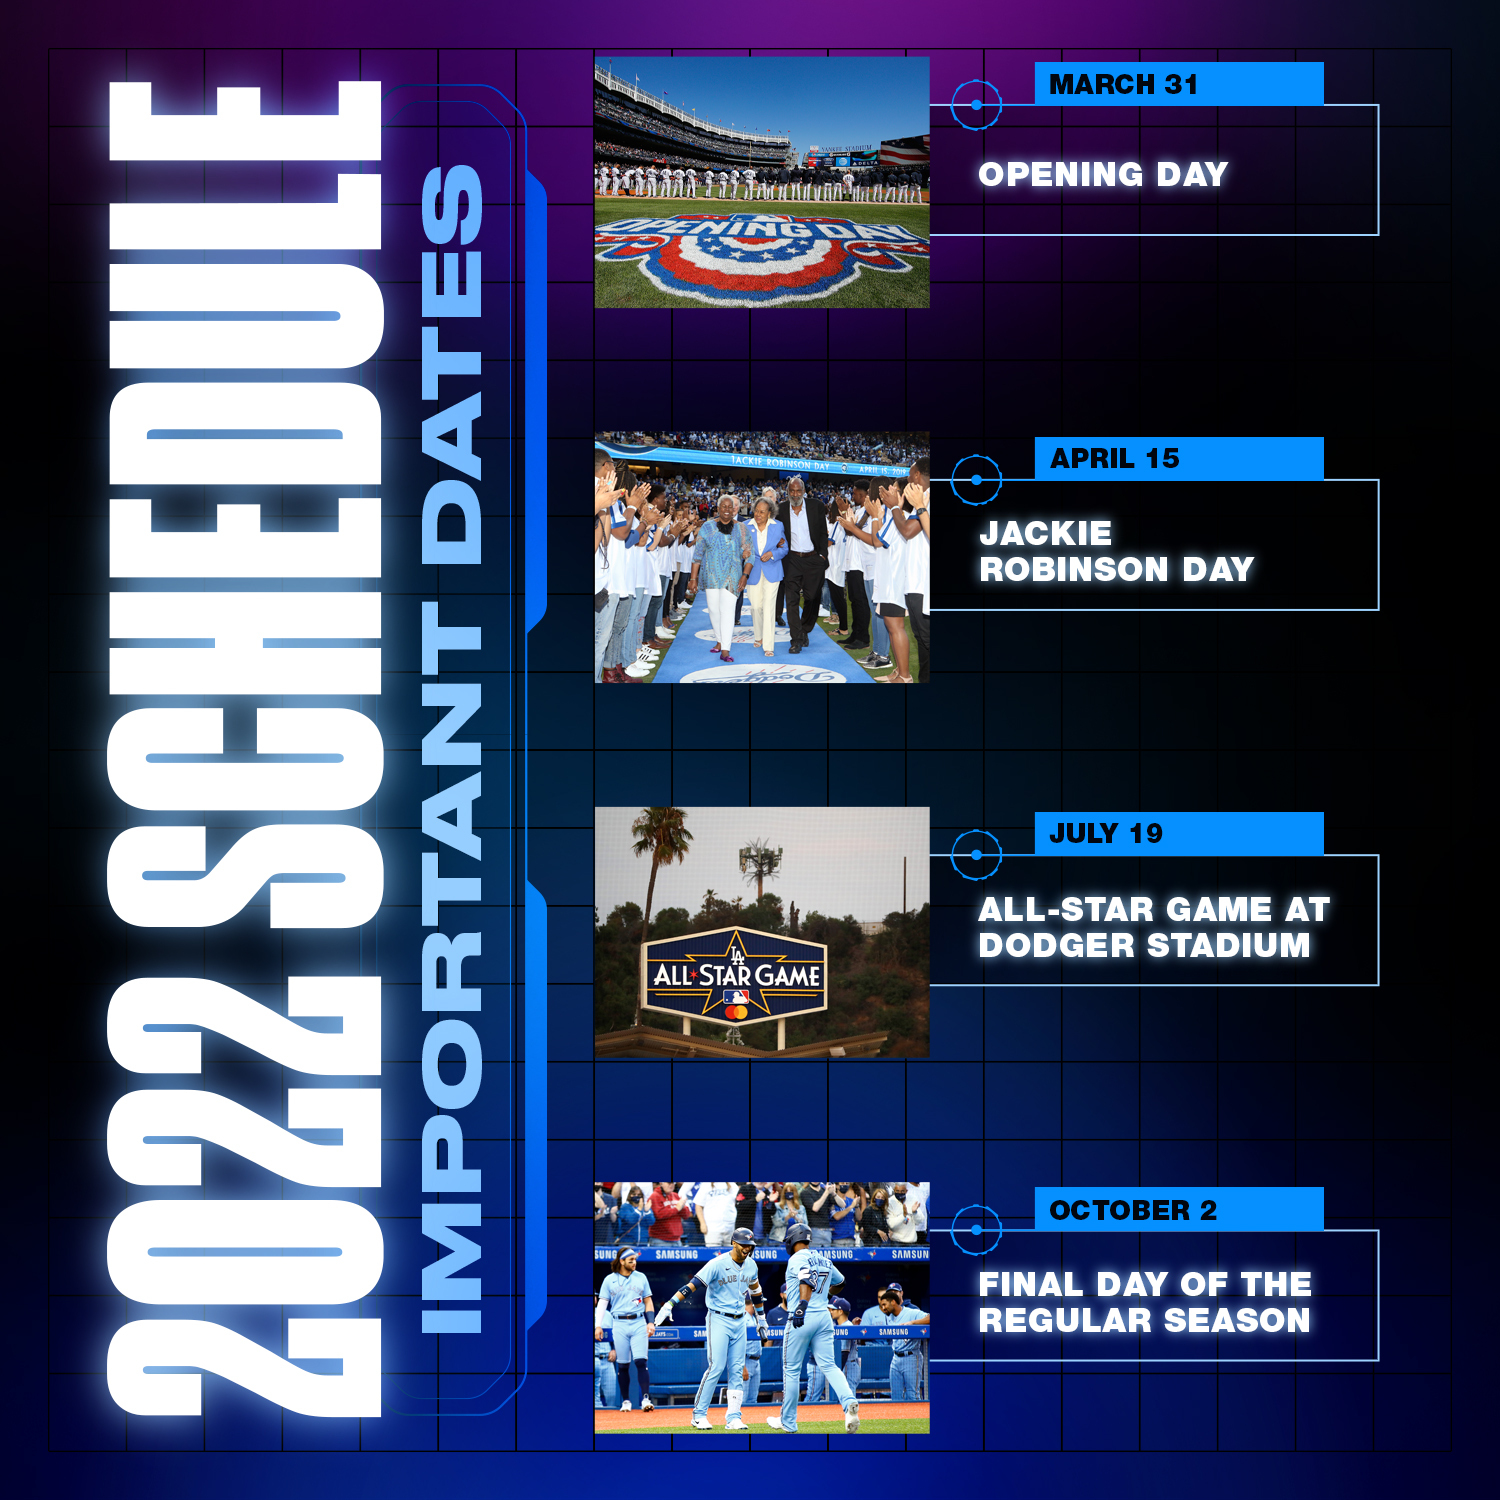 Mlb Schedule July 2022 Mlb On Twitter: "The 2022 Schedule Is Out! Mark Your Calendar Accordingly.  ⬇️ Https://T.co/By19Zgwwbu" / Twitter